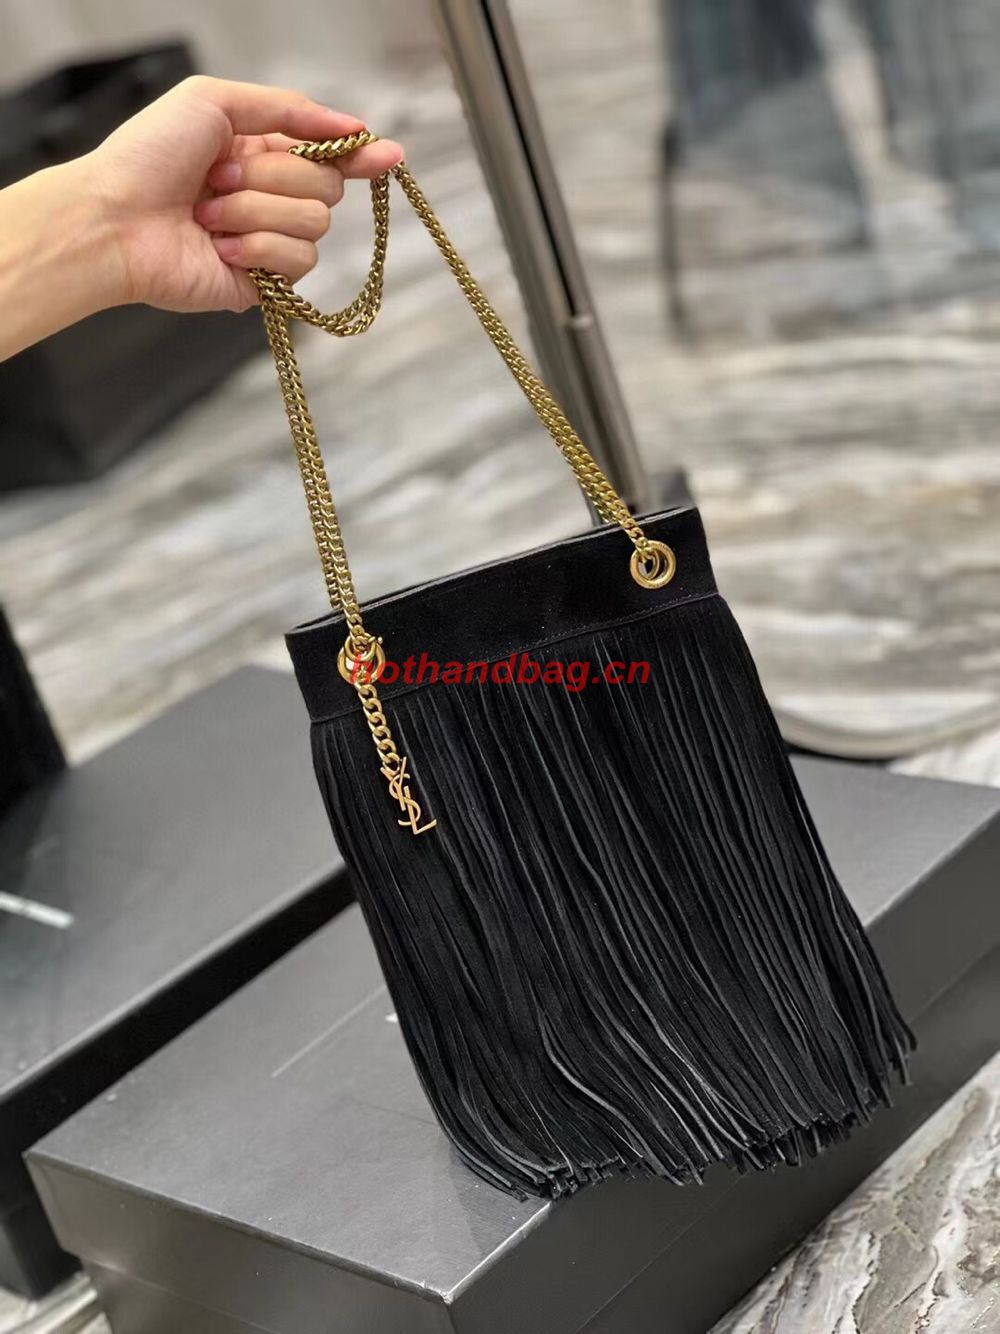 SAINT LAURENT SMALL CHAIN BAG IN LIGHT SUEDE WITH FRINGES 683378 BLACK